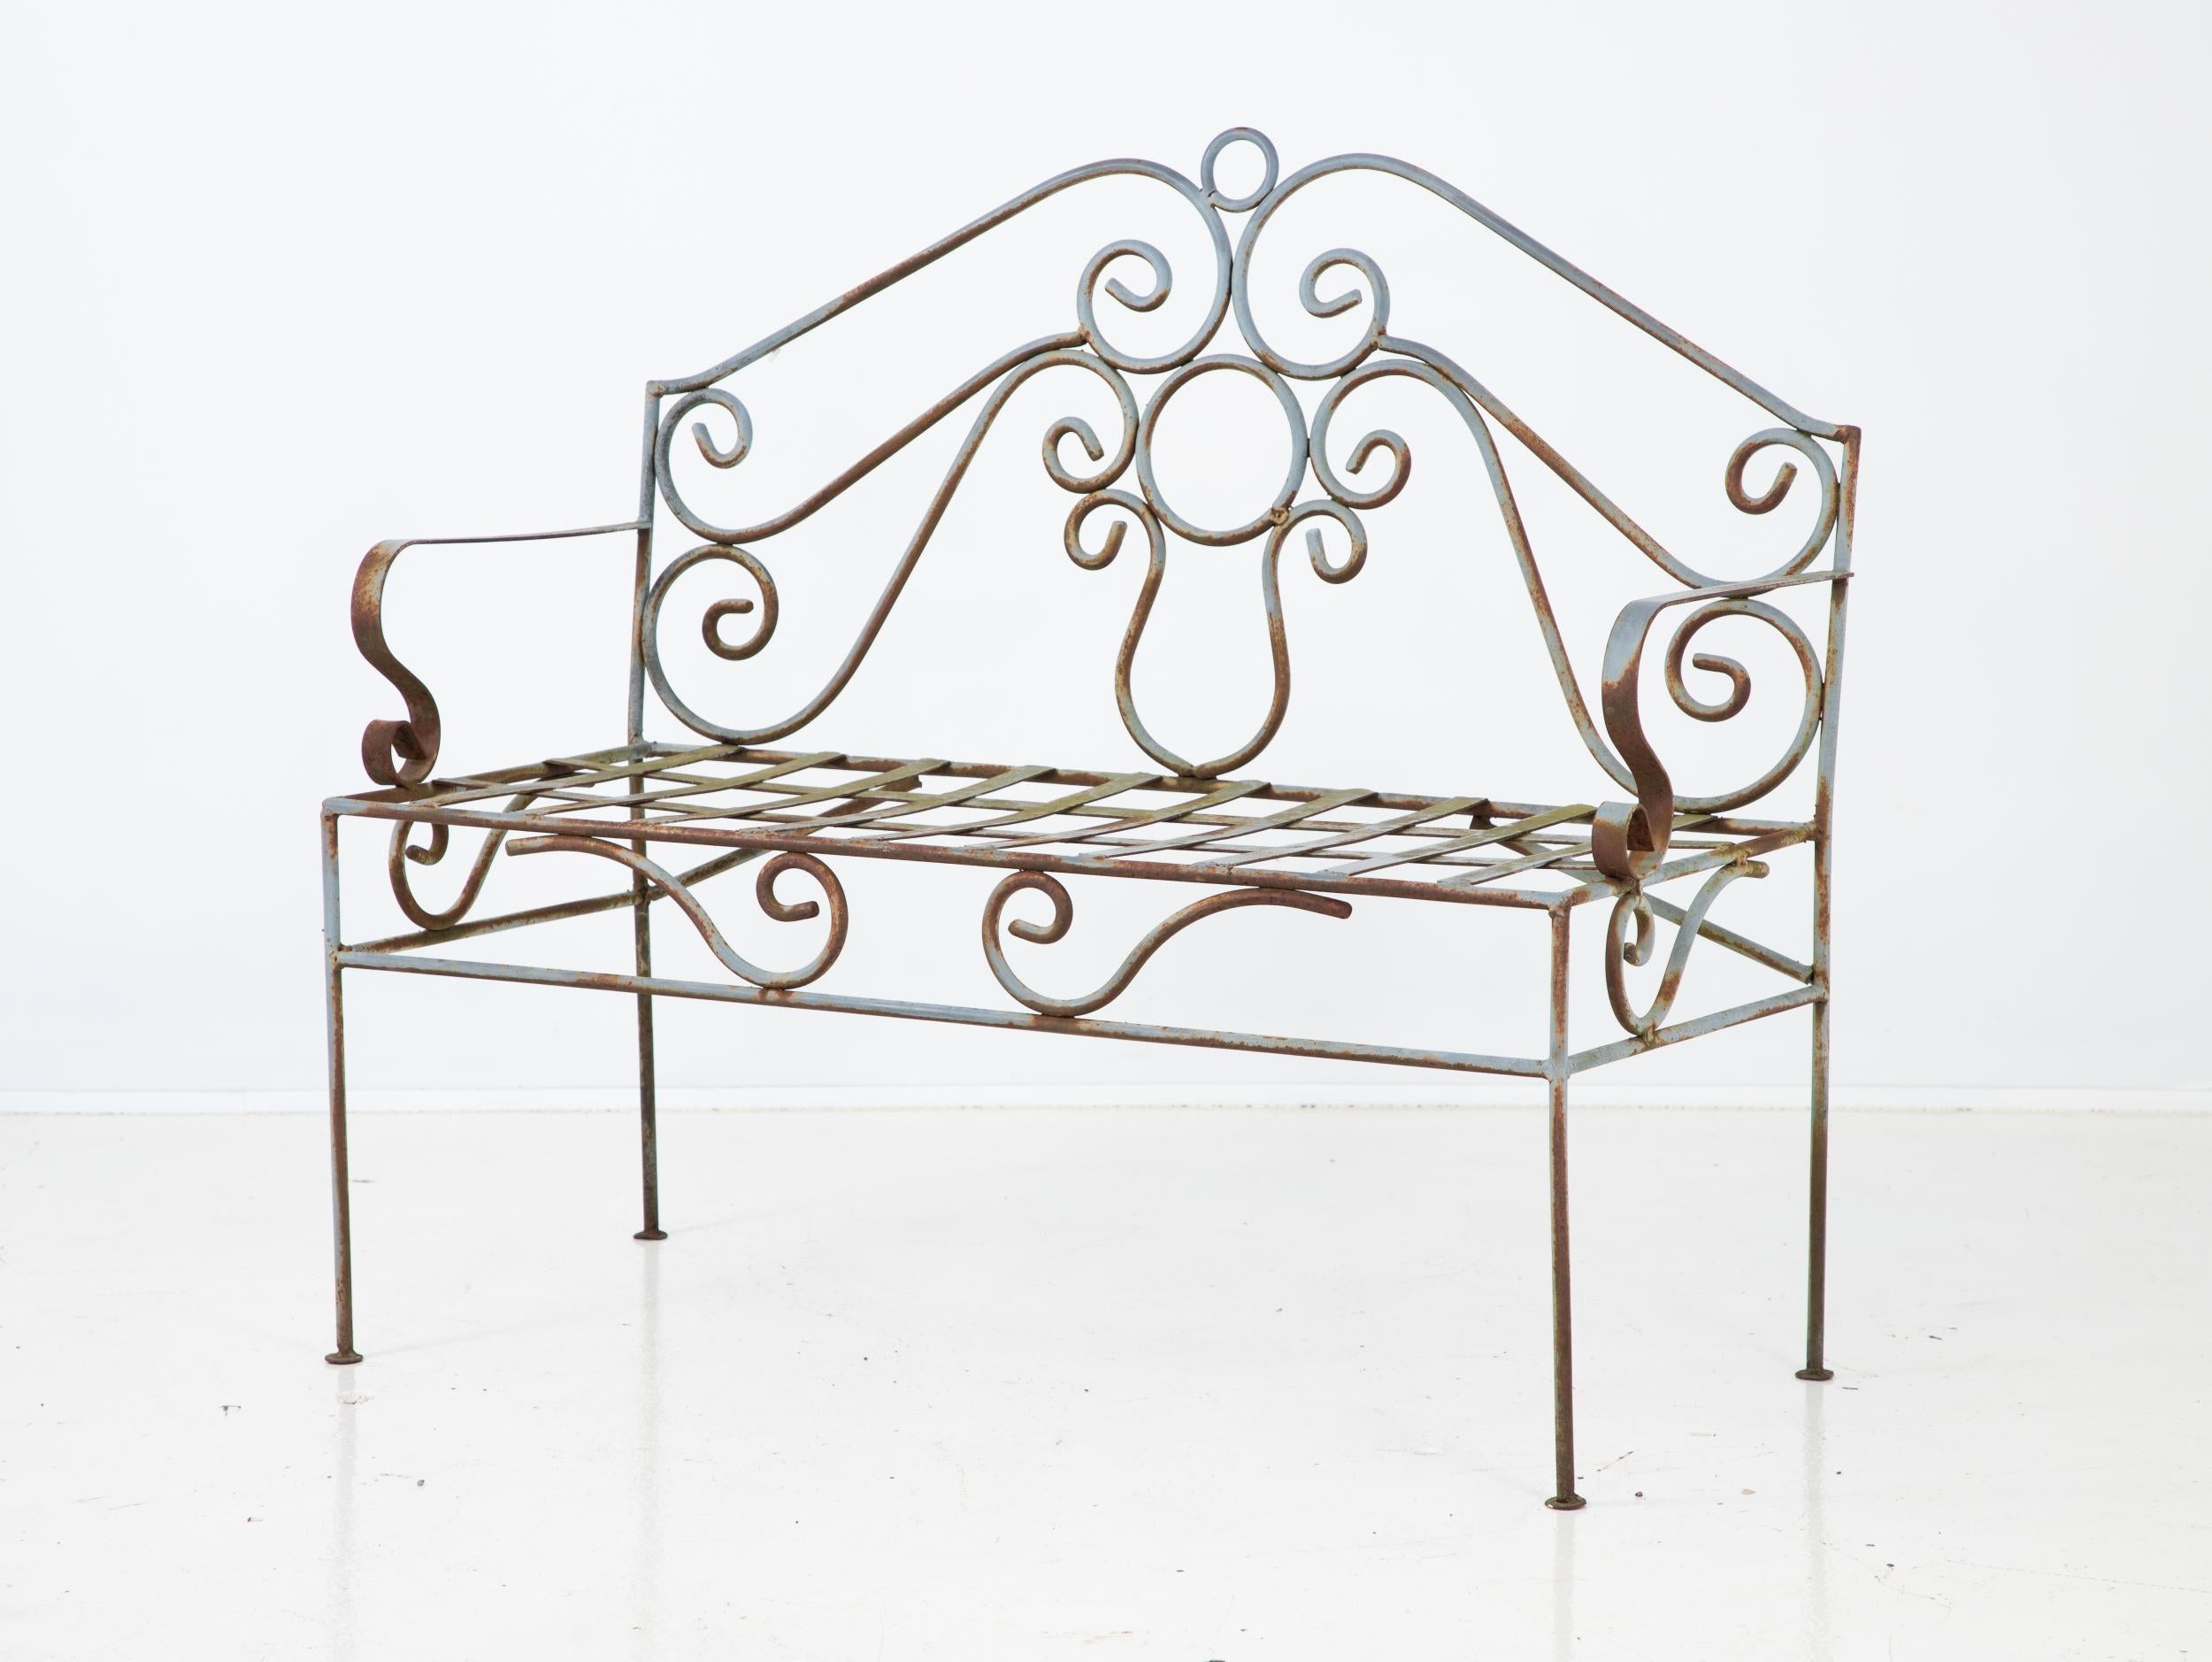 A French wrought iron bench with scroll back and arms. Repainted in slate blue color with some rust spots. Wear consistent with age and use. Seat height 16.5